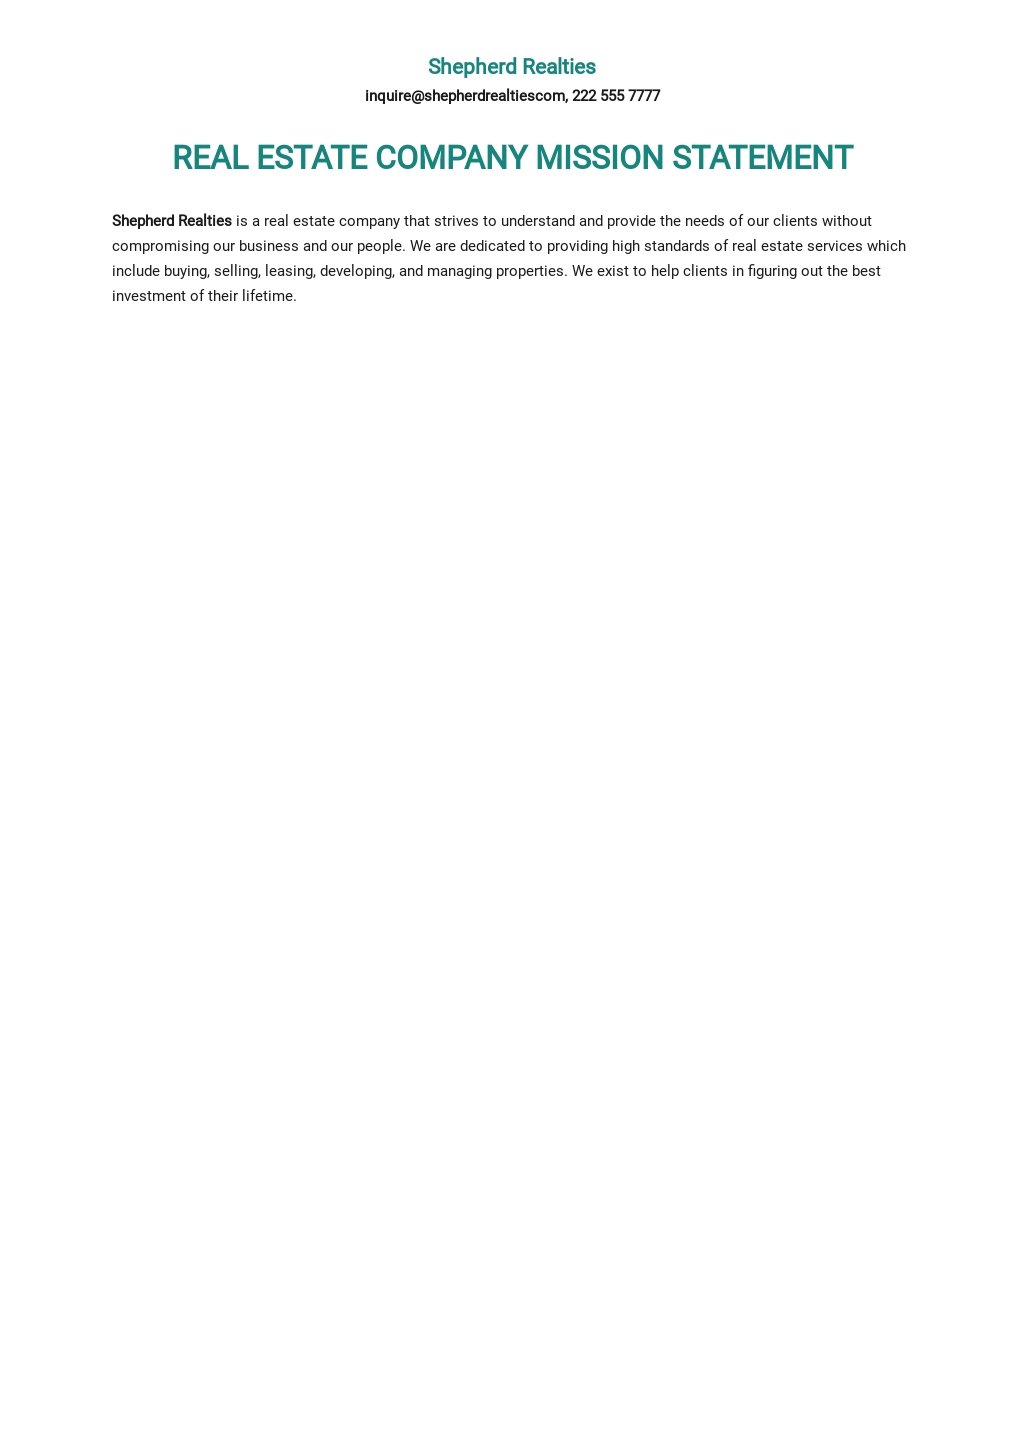 Free Real Estate Company Sample Mission Statement Template.jpe